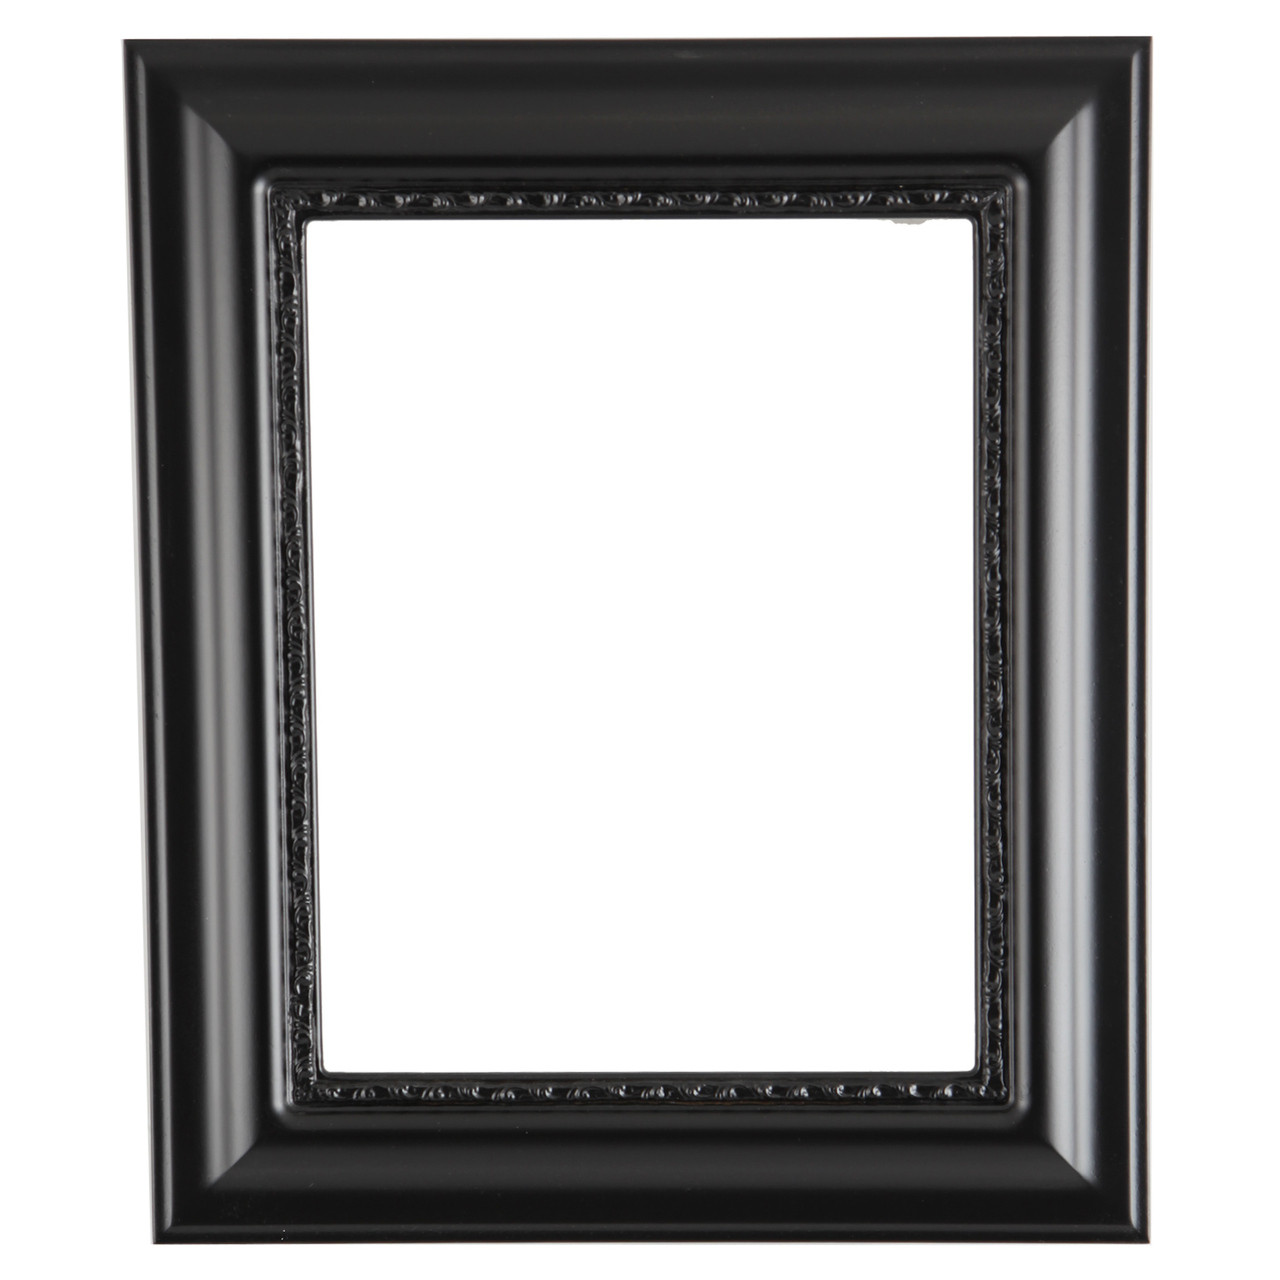 Portrait Frame Beautiful Mirror Border- 16x20 or matted For 11x14